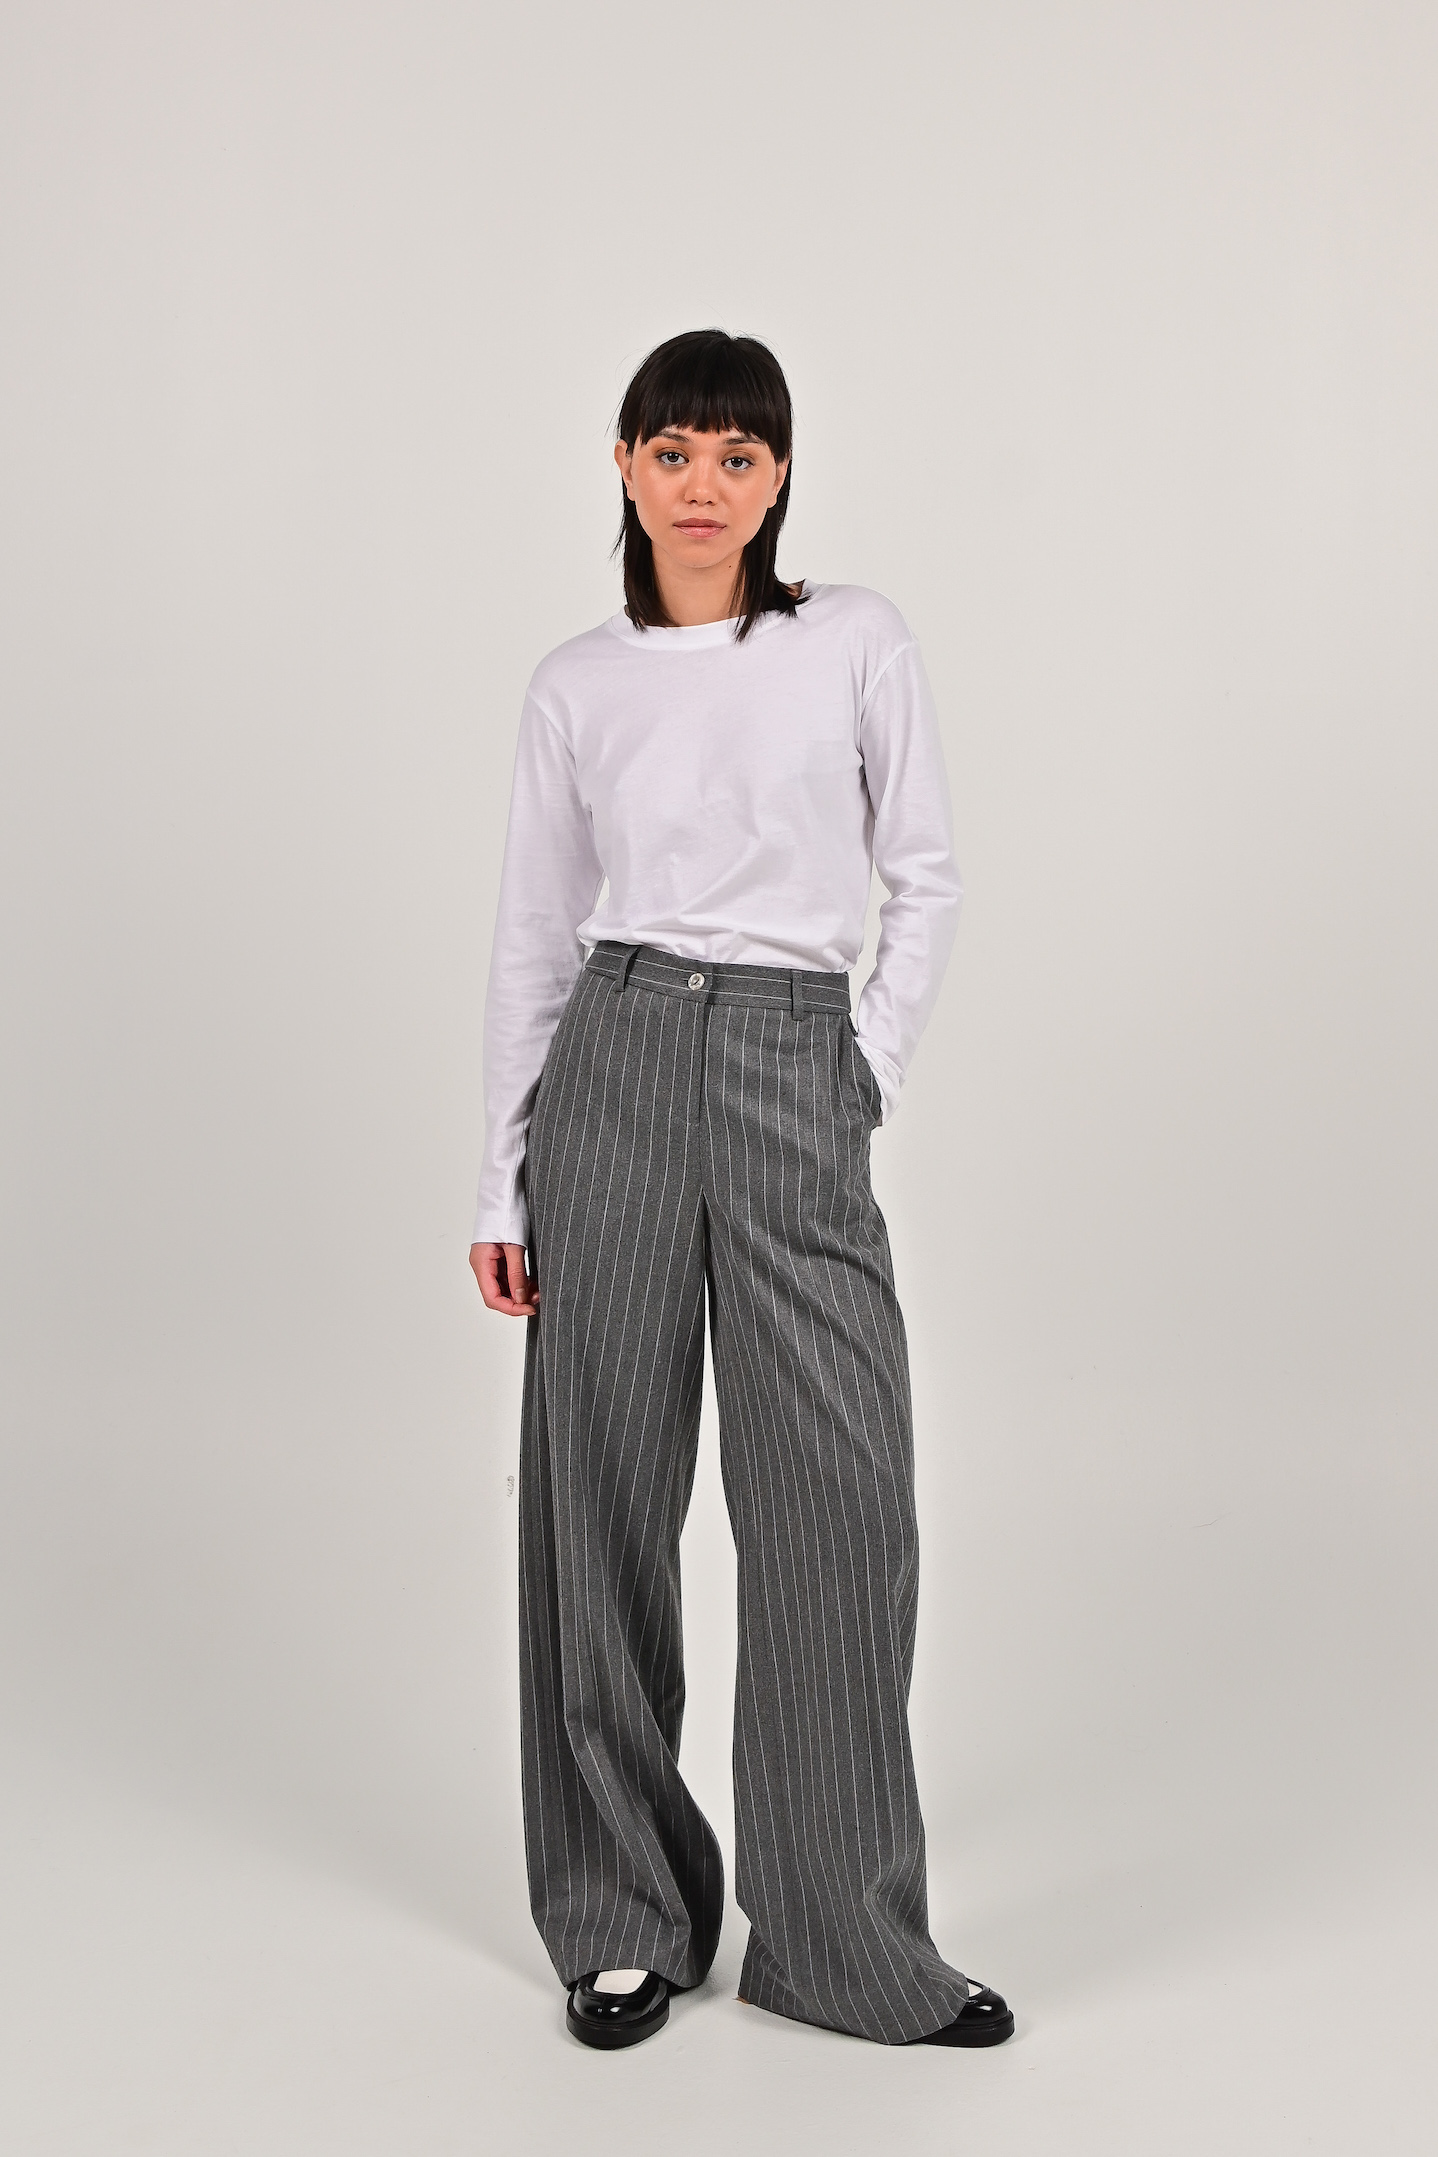 Lisa trousers - grey pinstripe - FAM the label